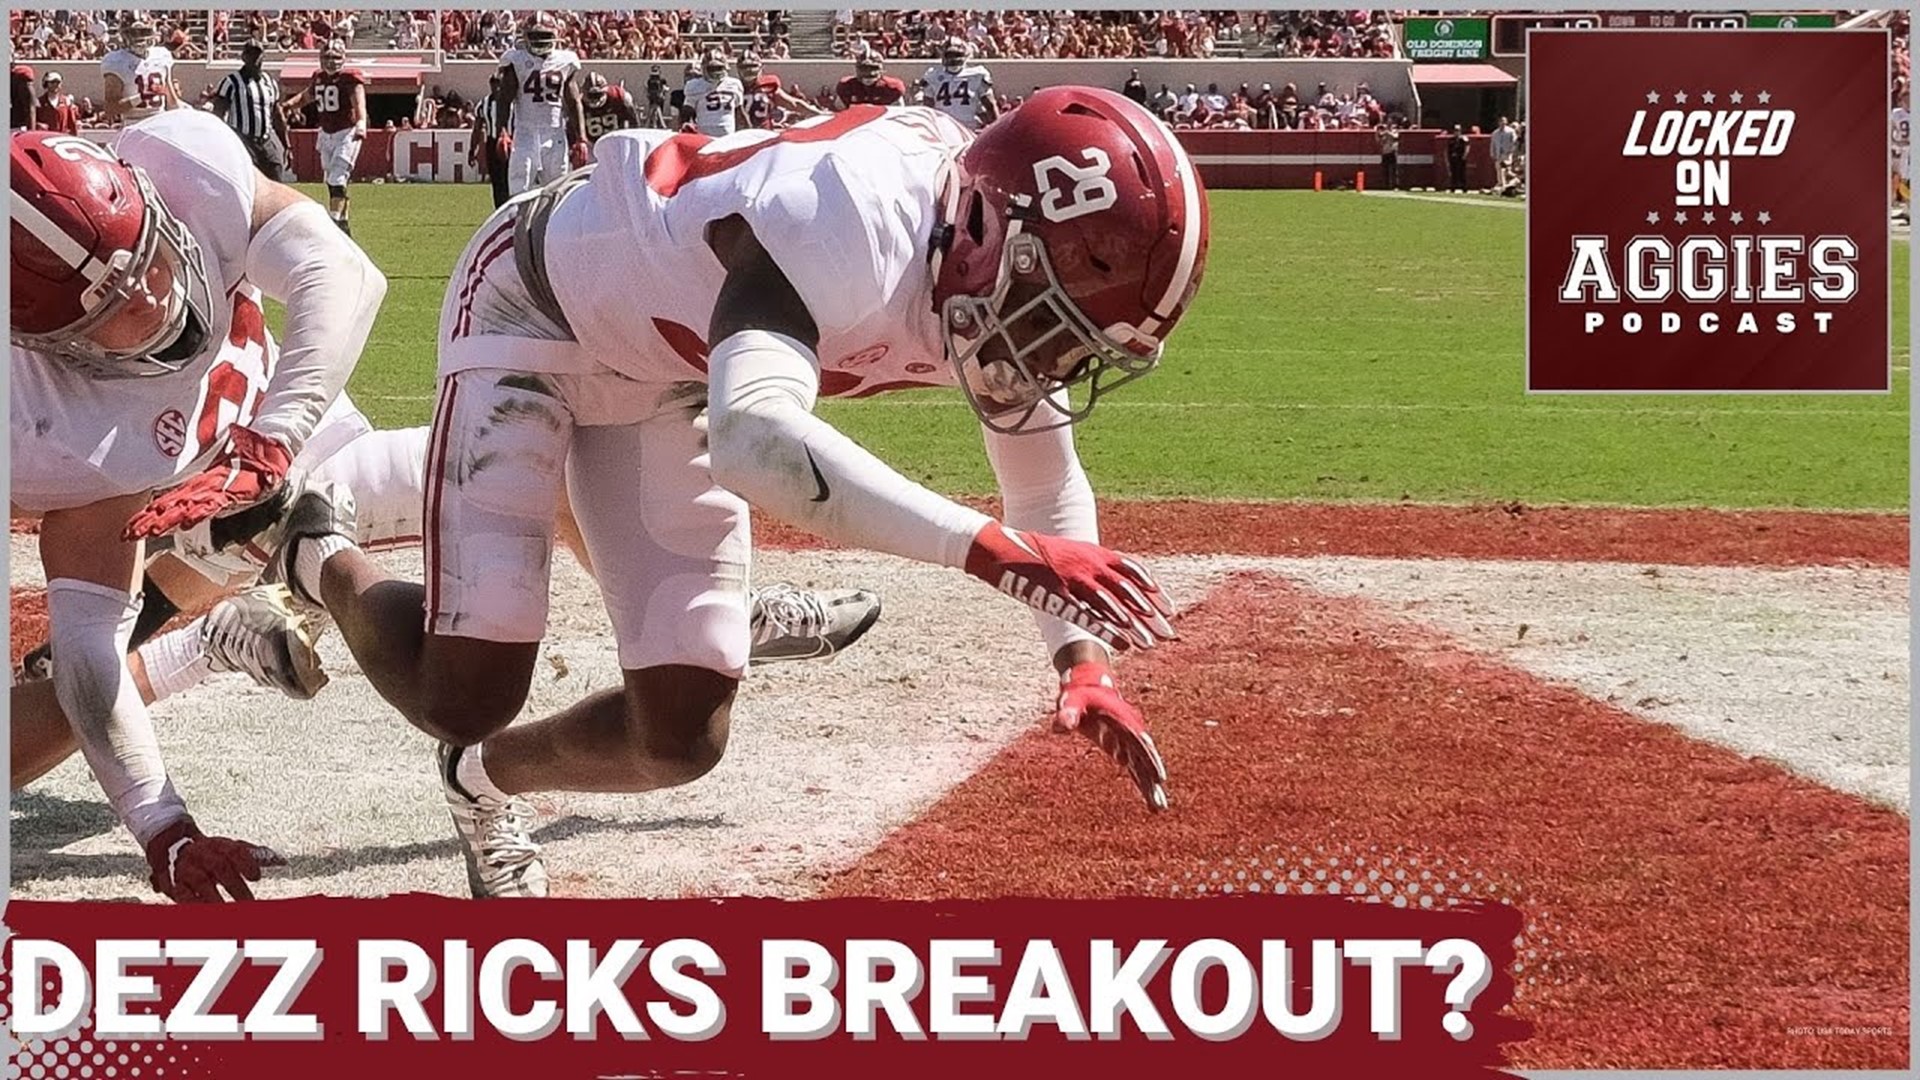 On today's episode of Locked On Aggies, host Andrew Stefaniak talks about a few breakout candidates for Texas A&M's spring game.